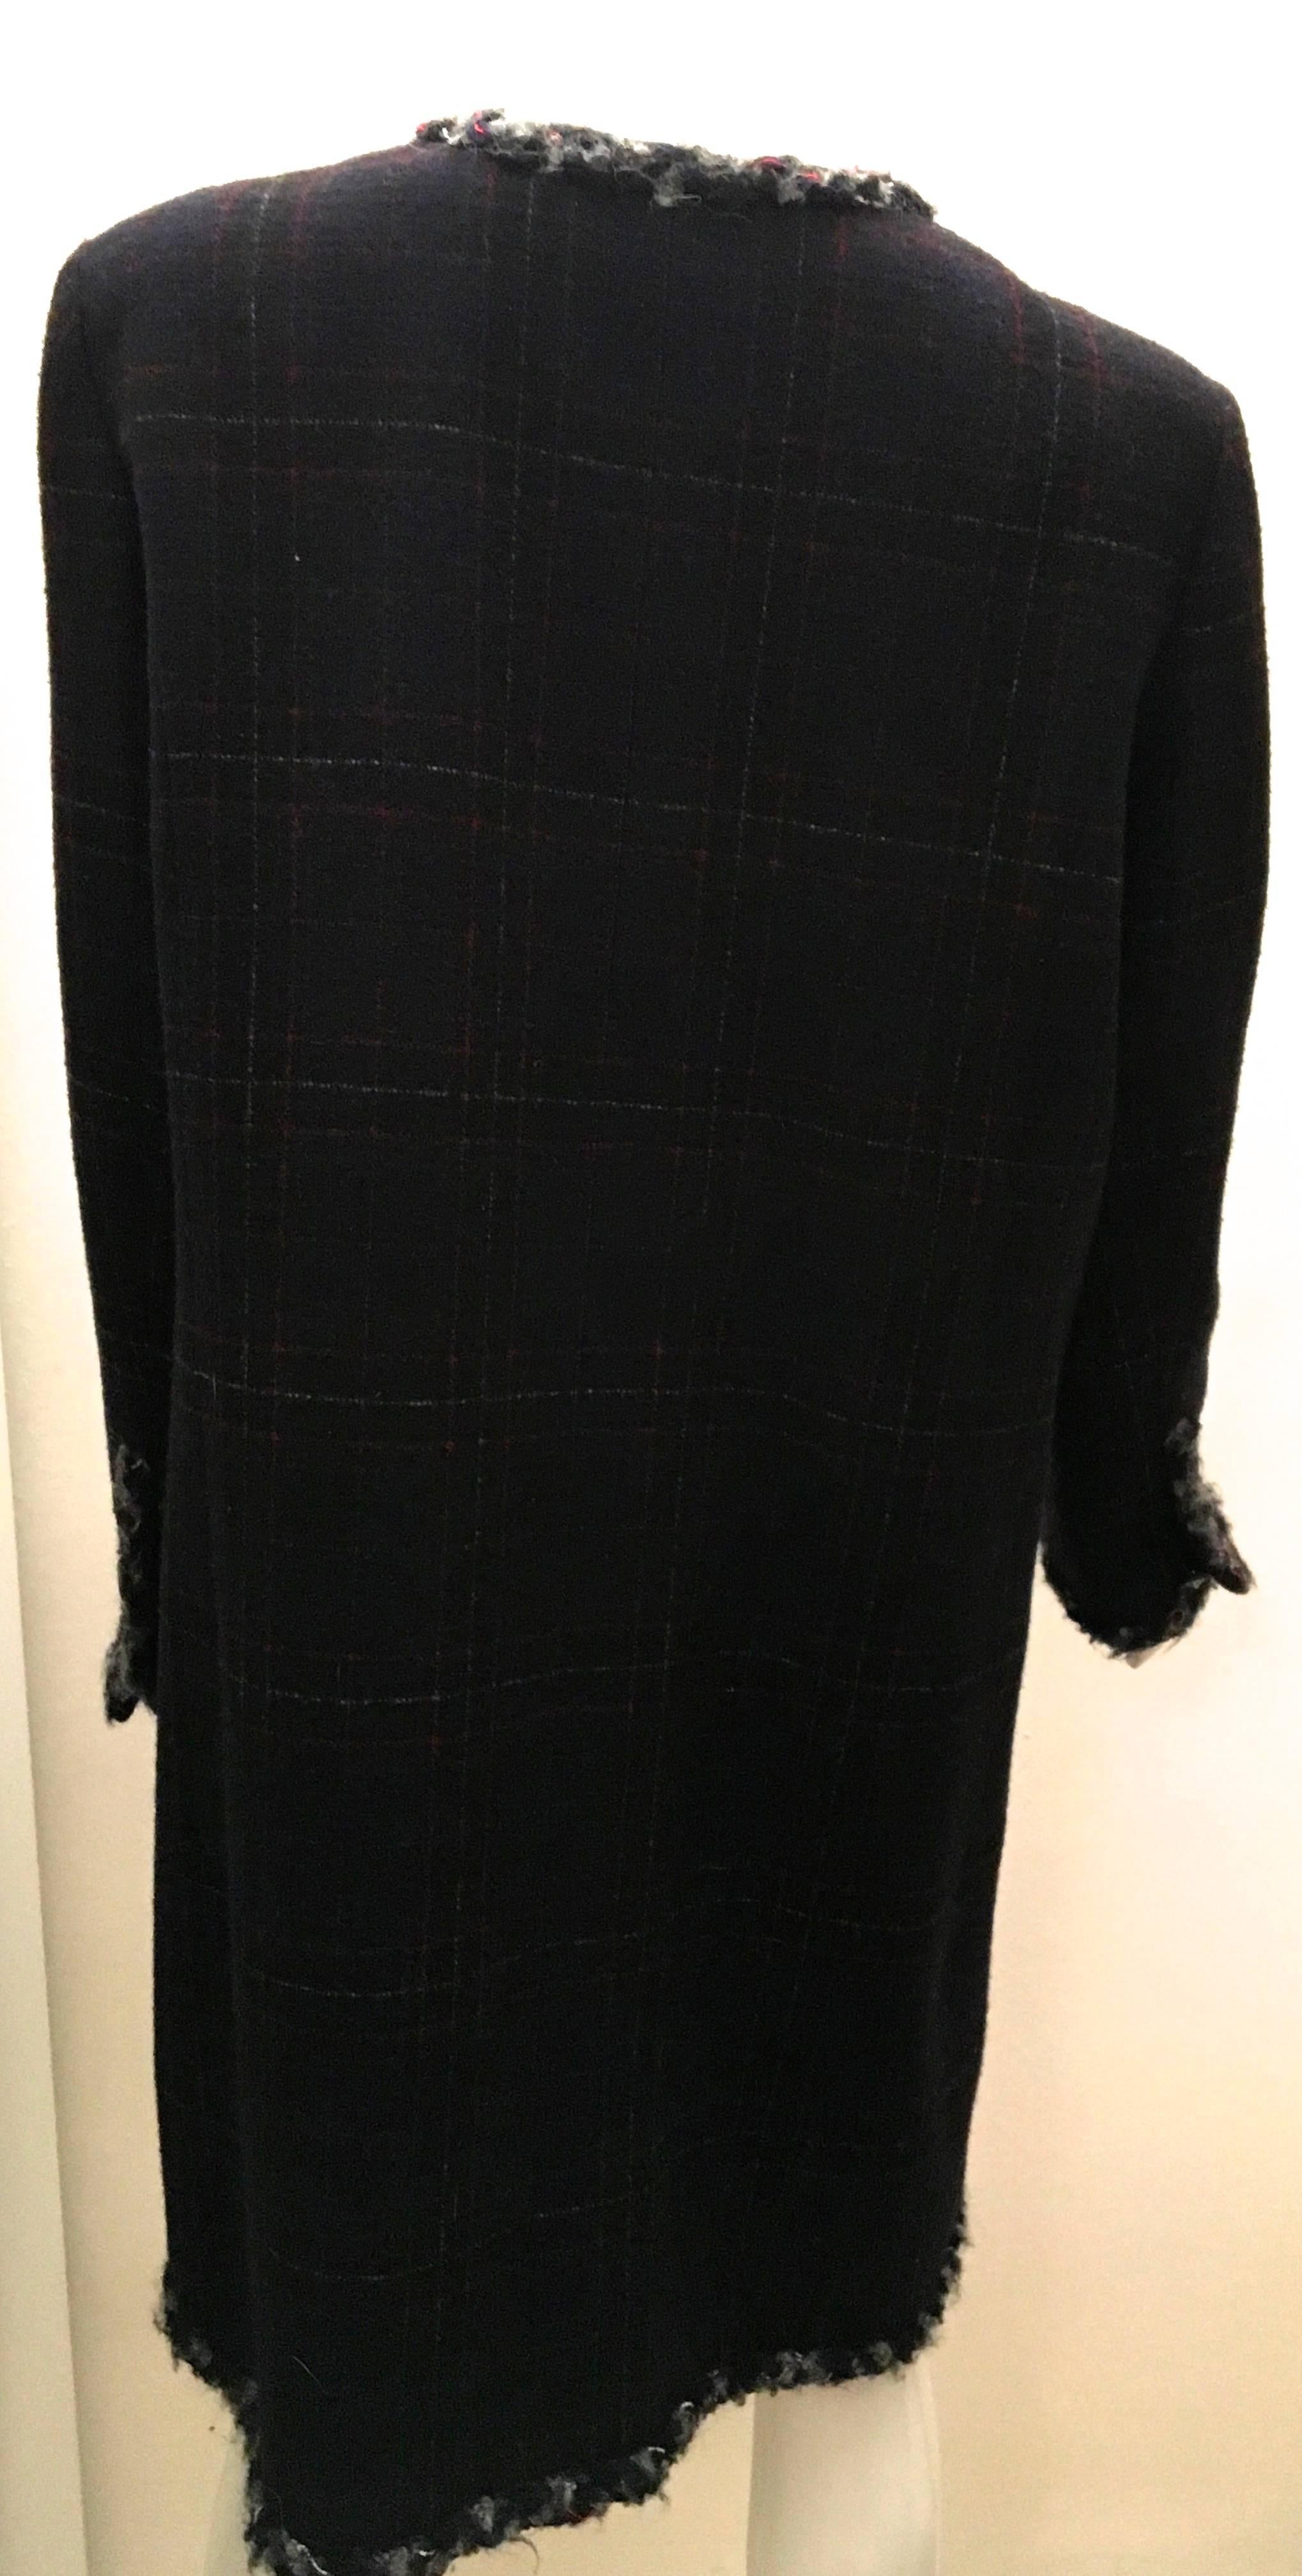 Presented here is a Chanel boucle coat that screams Chanel in that ever so subtle way.  The coat is a size 46 although no alterations have been made it seems to run a bit small. But, as always with Chanel there is plenty of room for adjustments to